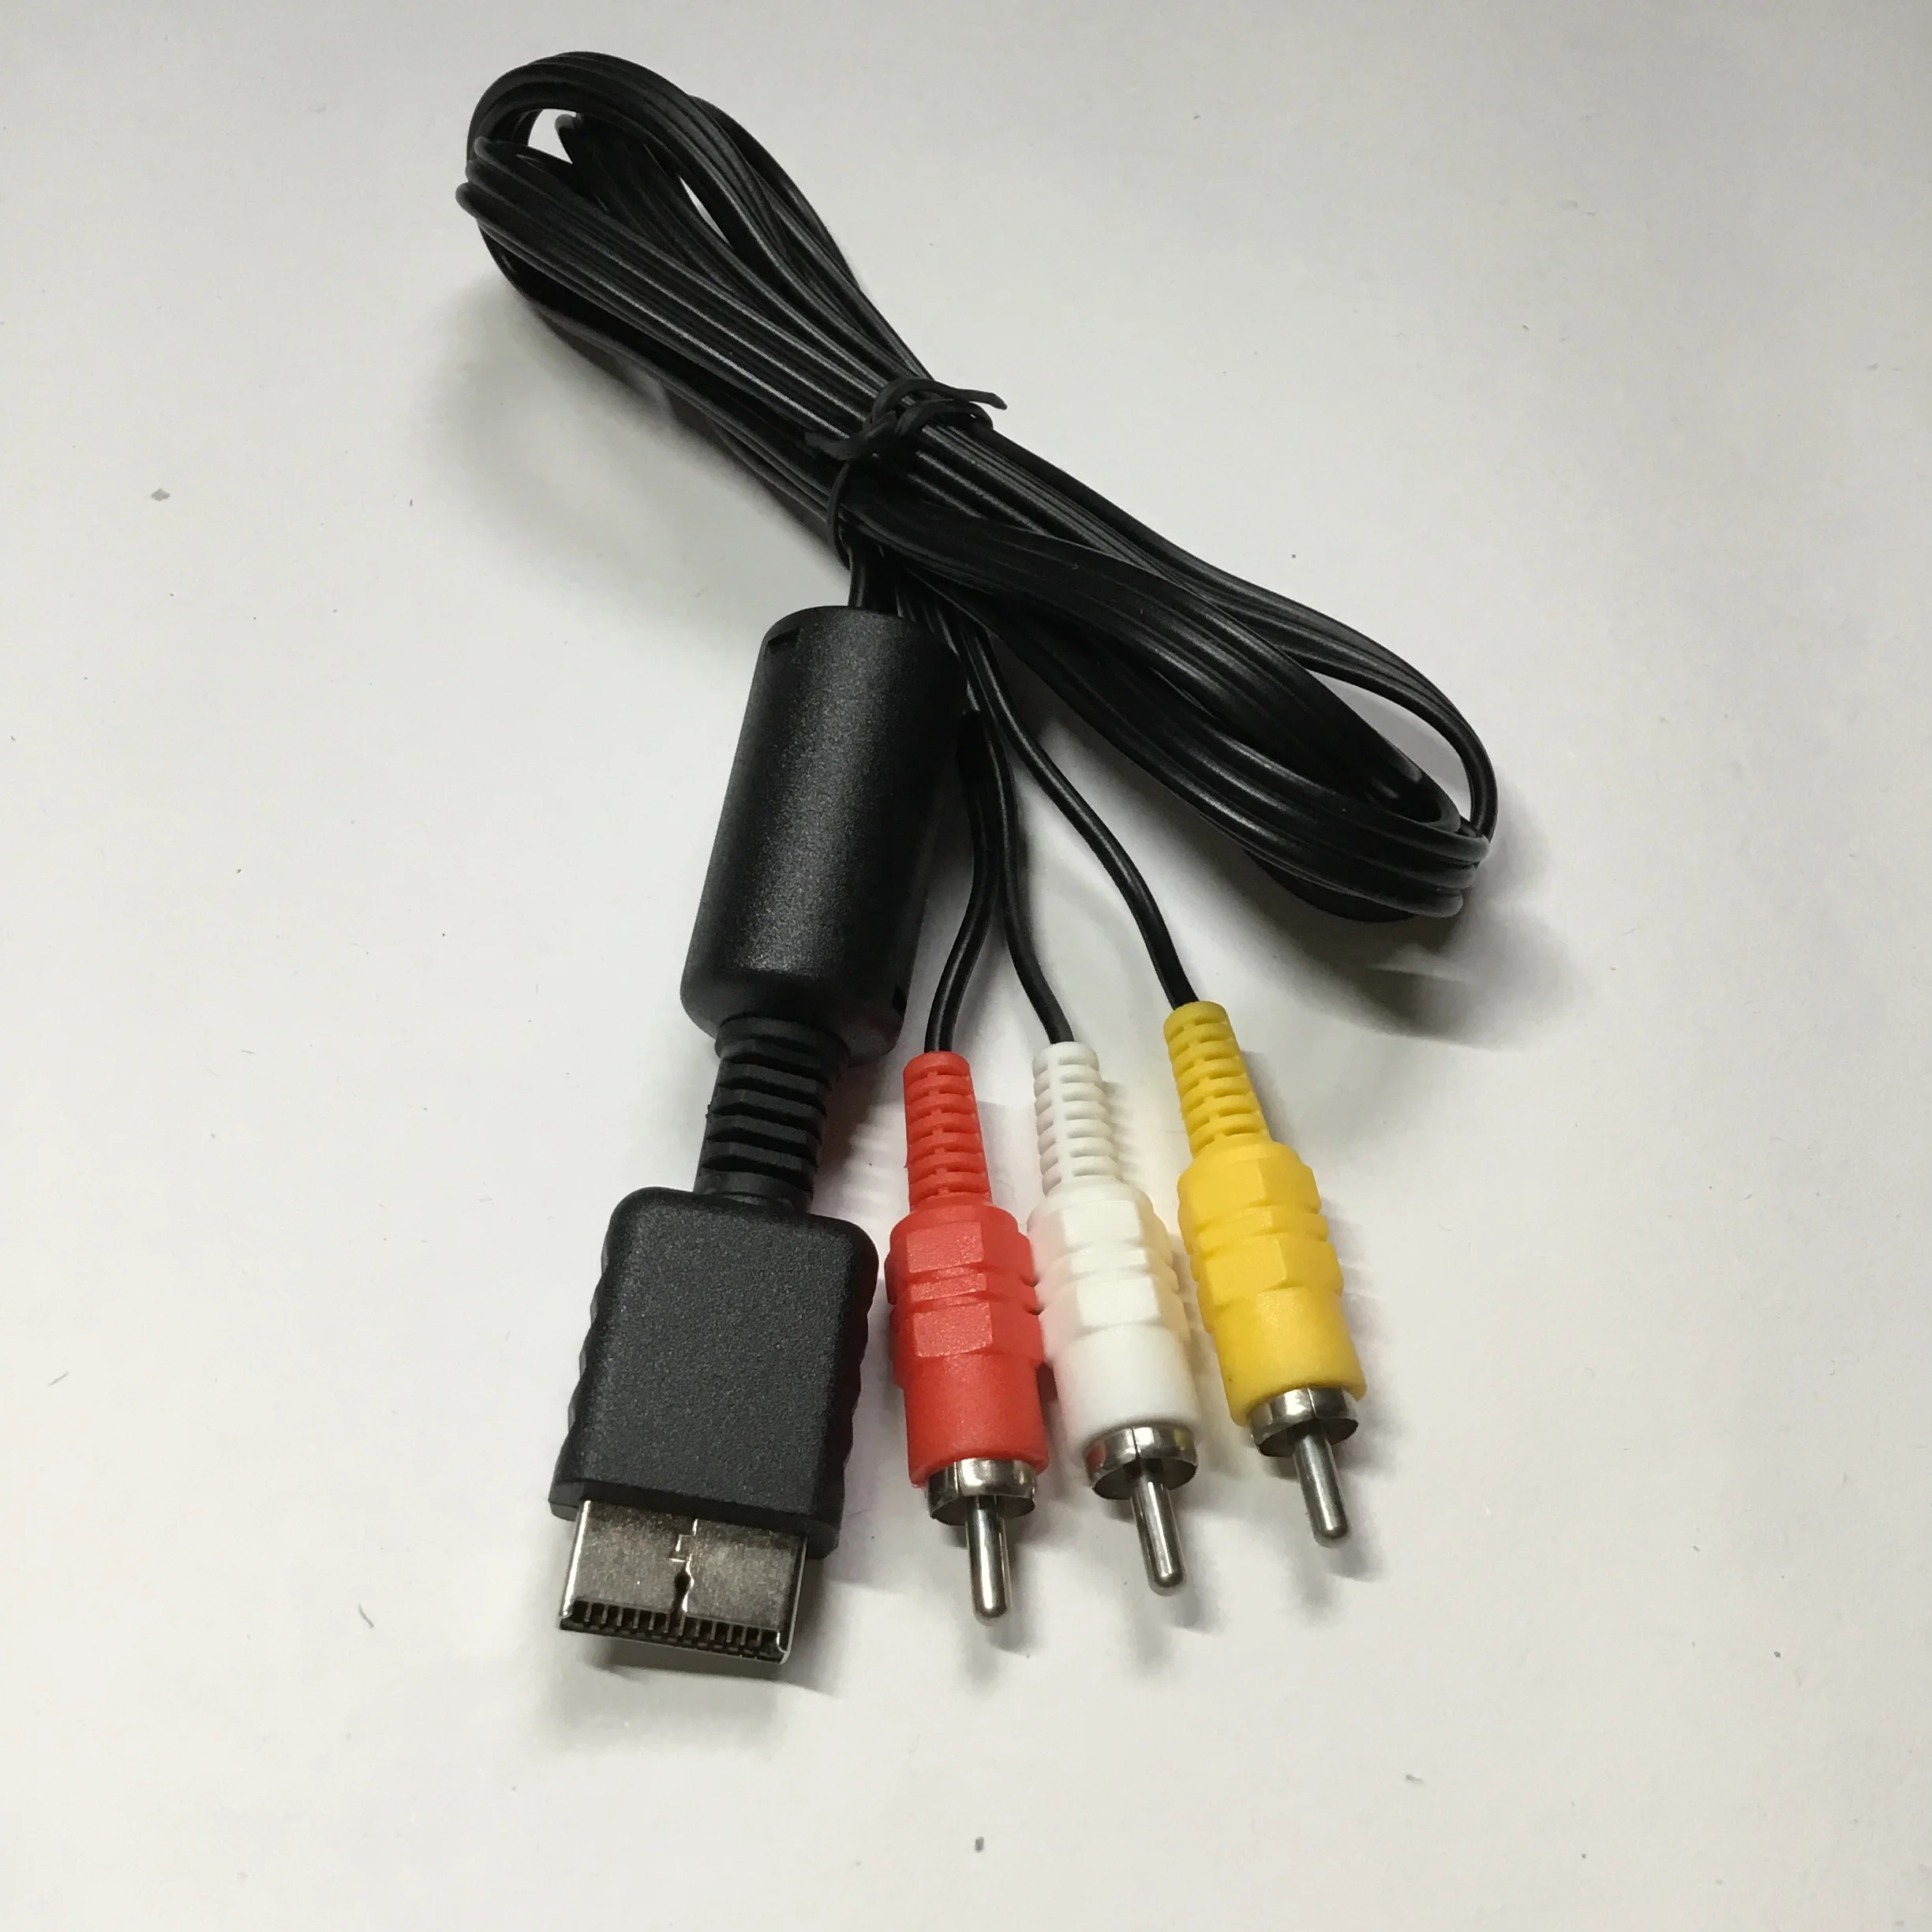 ps3 audio video cable